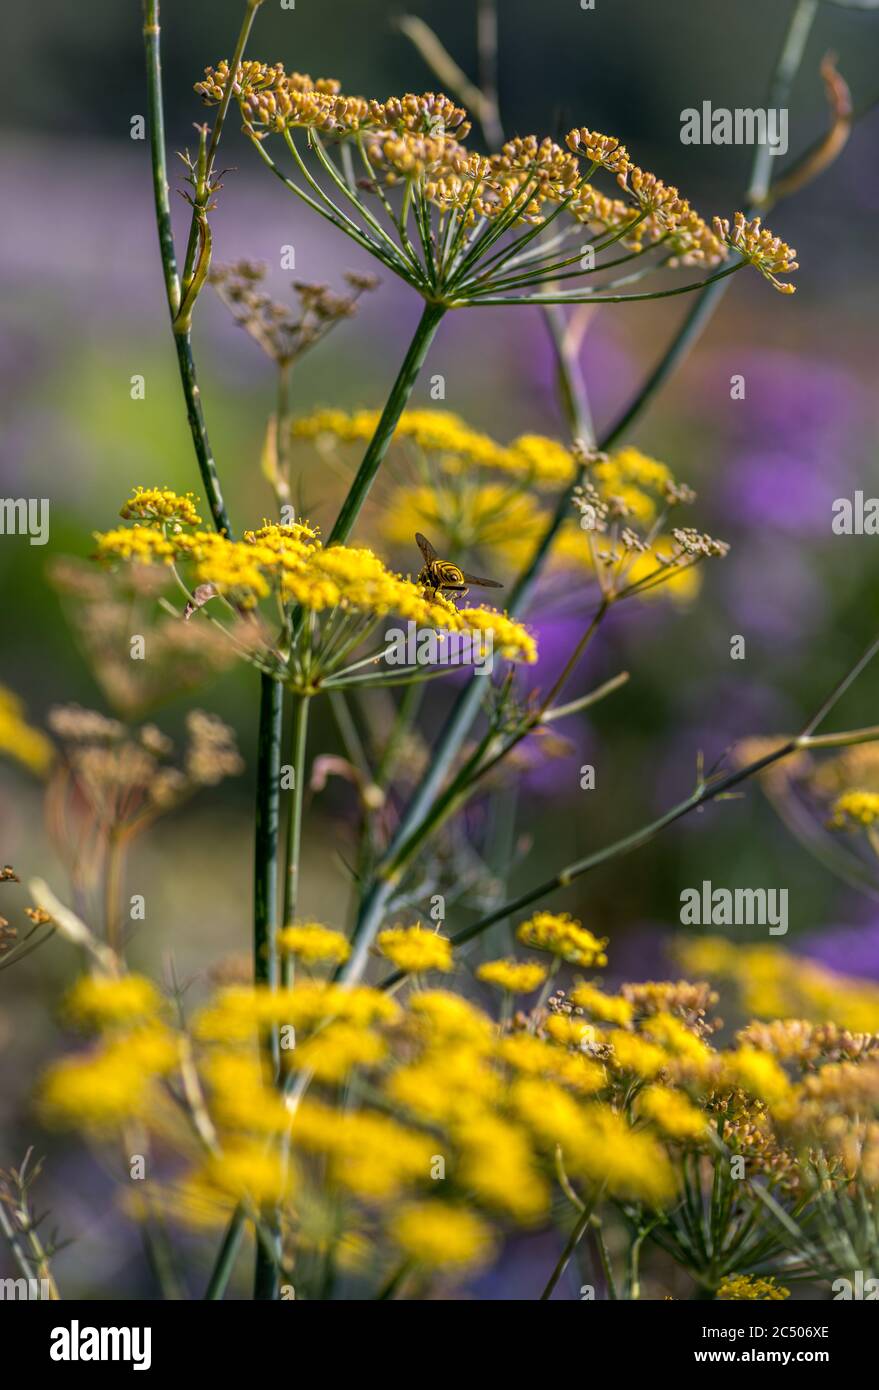 A beautiful flowering fennel plant attracting insects and bees. Stock Photo